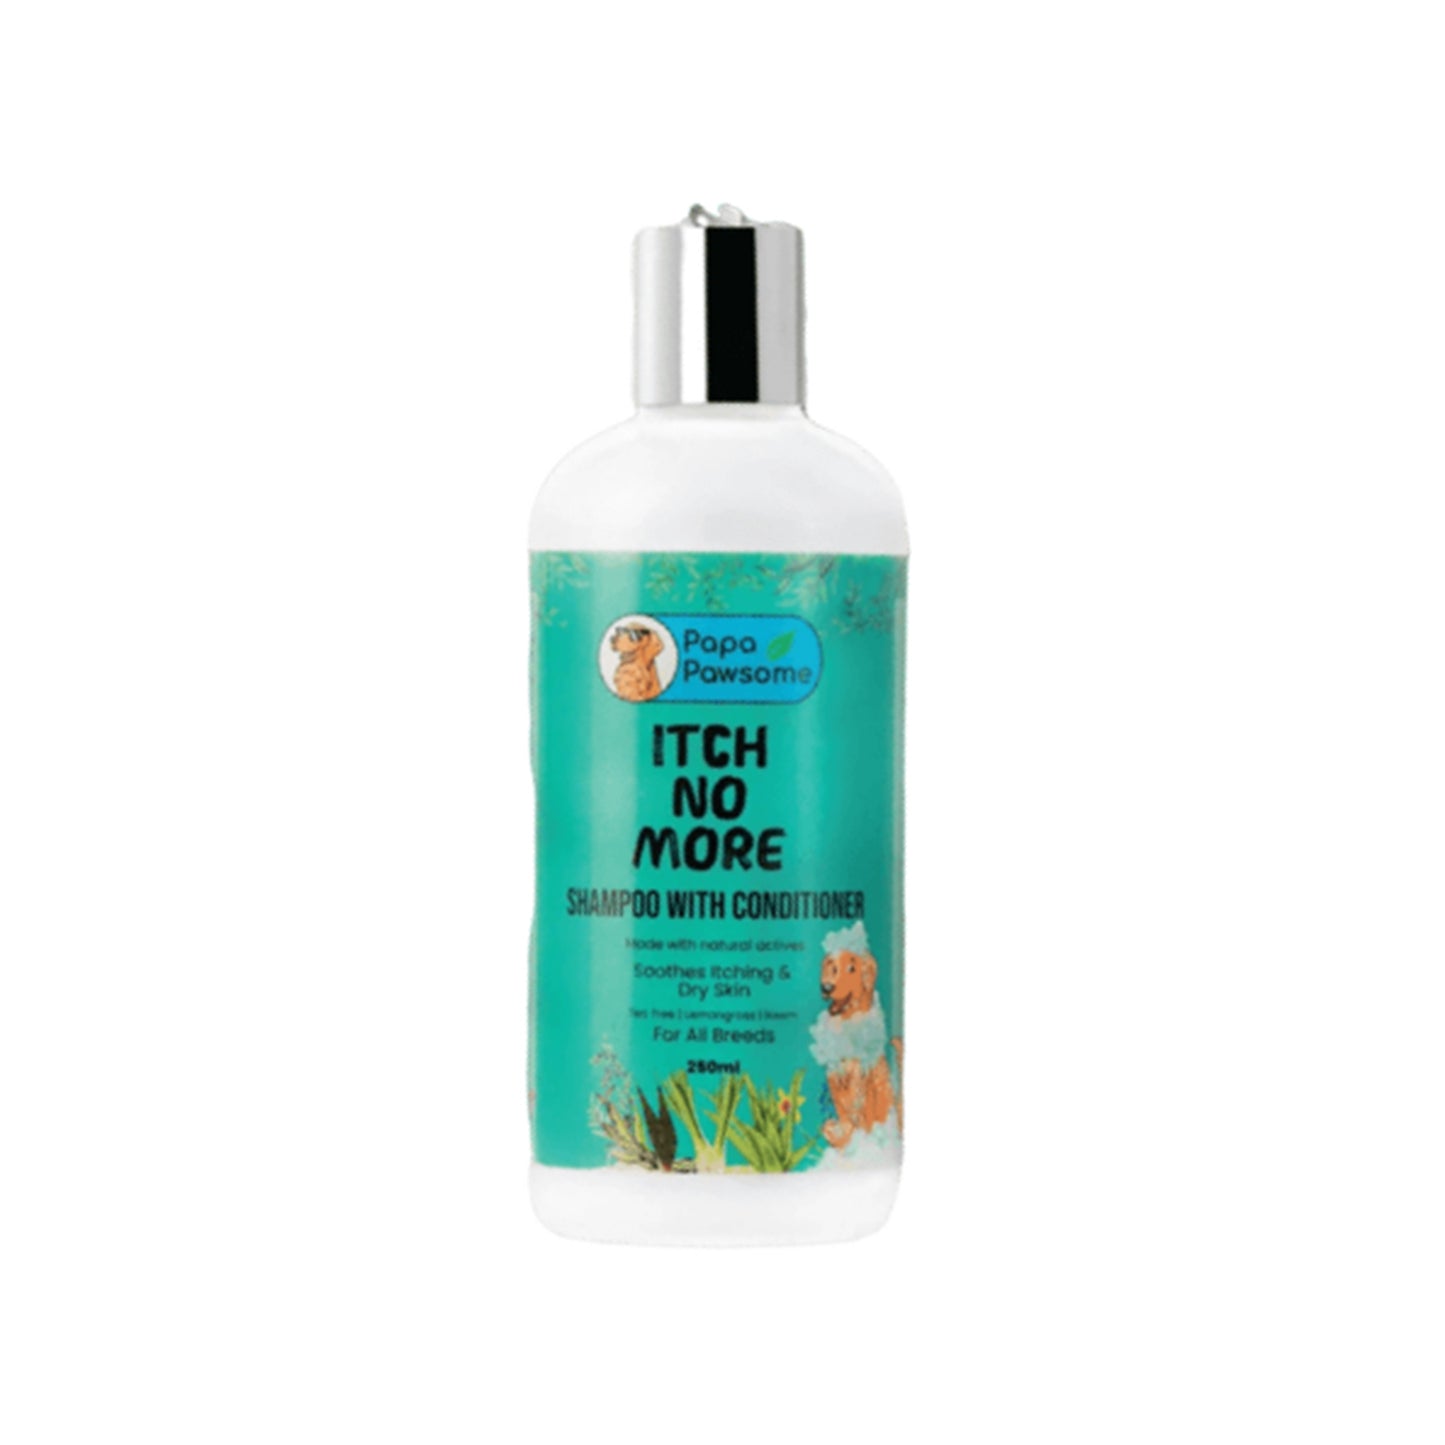 Papa Pawsome - Itch No More Shampoo with Conditioner for Dogs